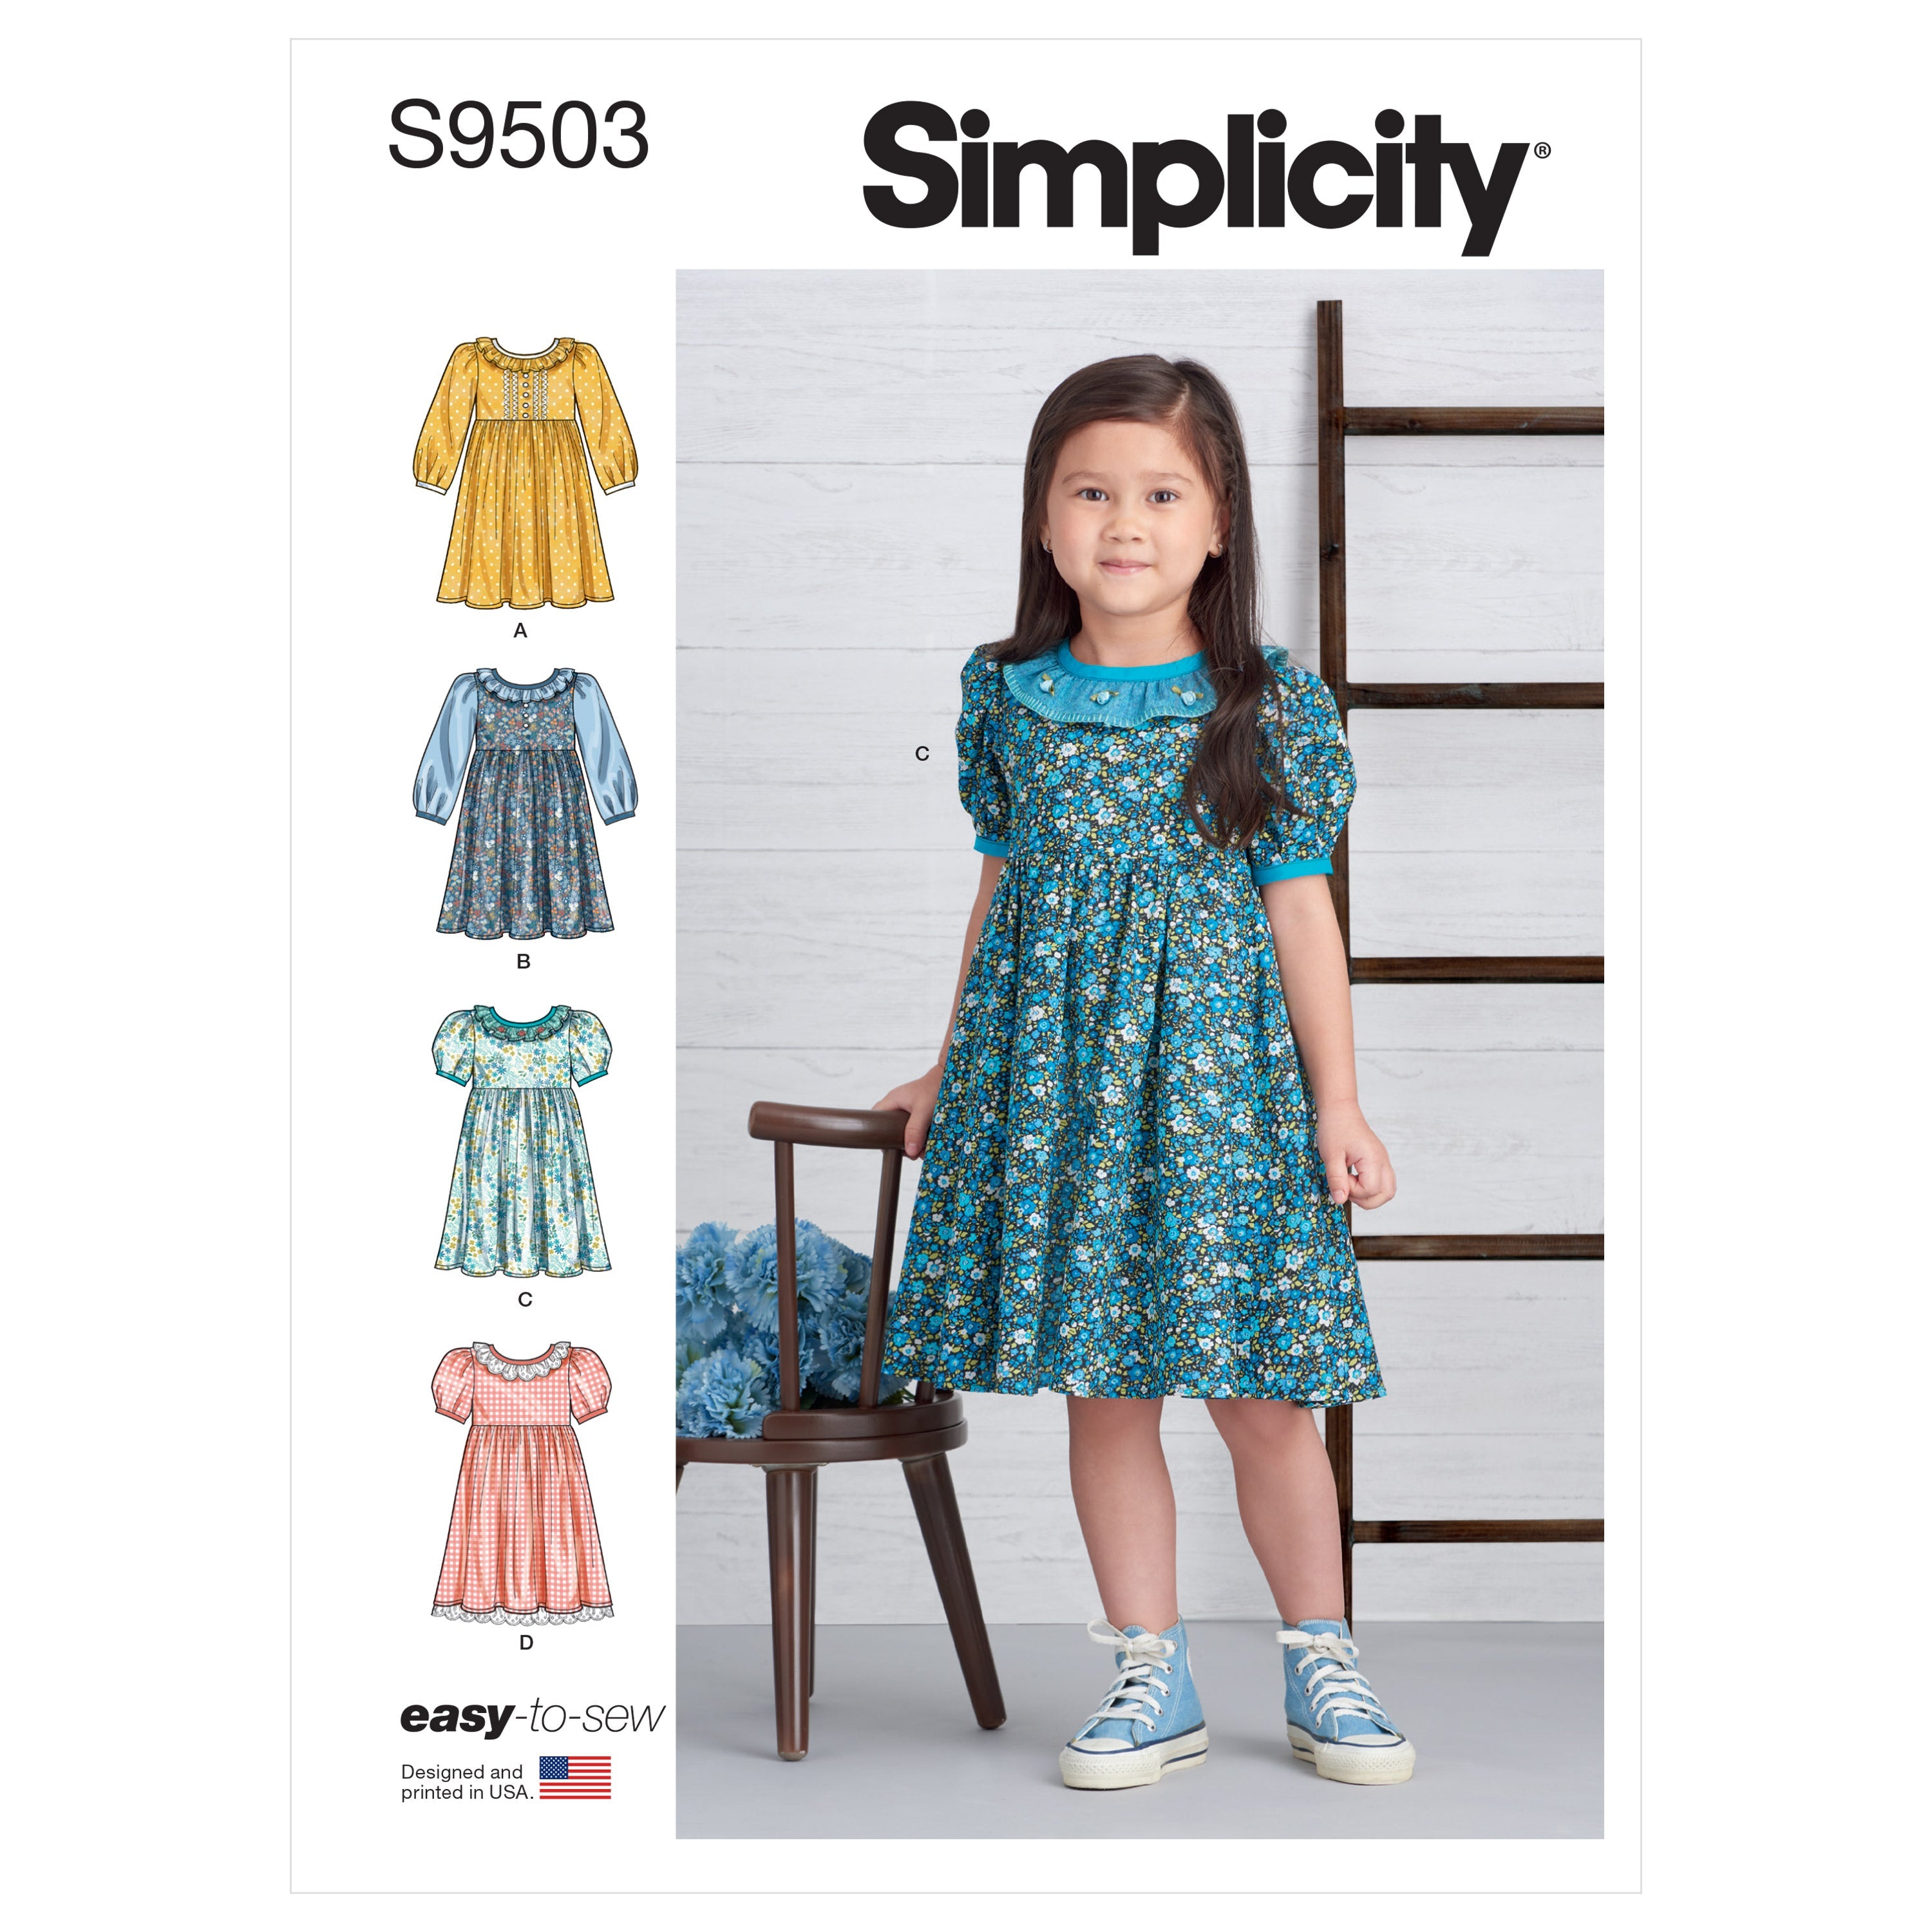 Simplicity Sewing Pattern 9503 Childrens Dresses from Jaycotts Sewing Supplies